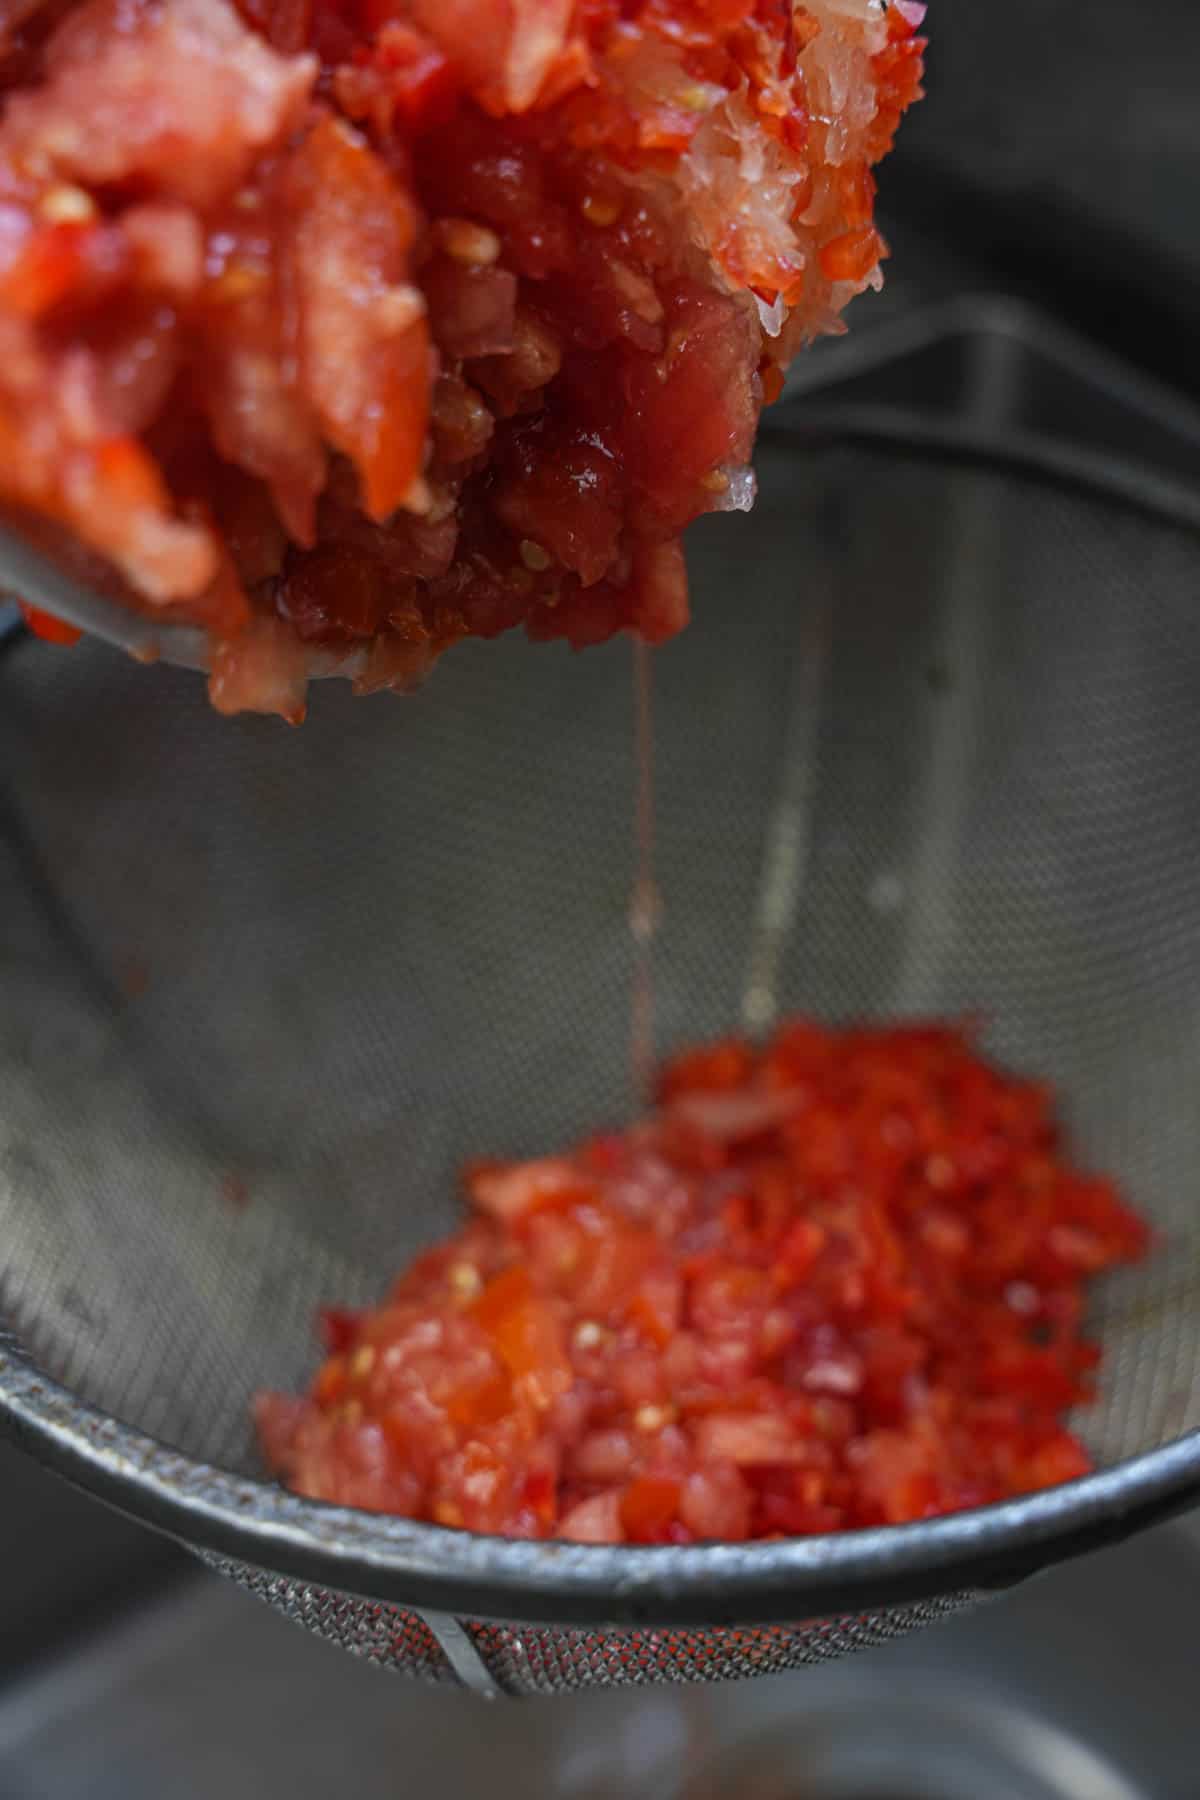 The minced tomatoes, onions and peppers are drained in a wire mesh strainer.